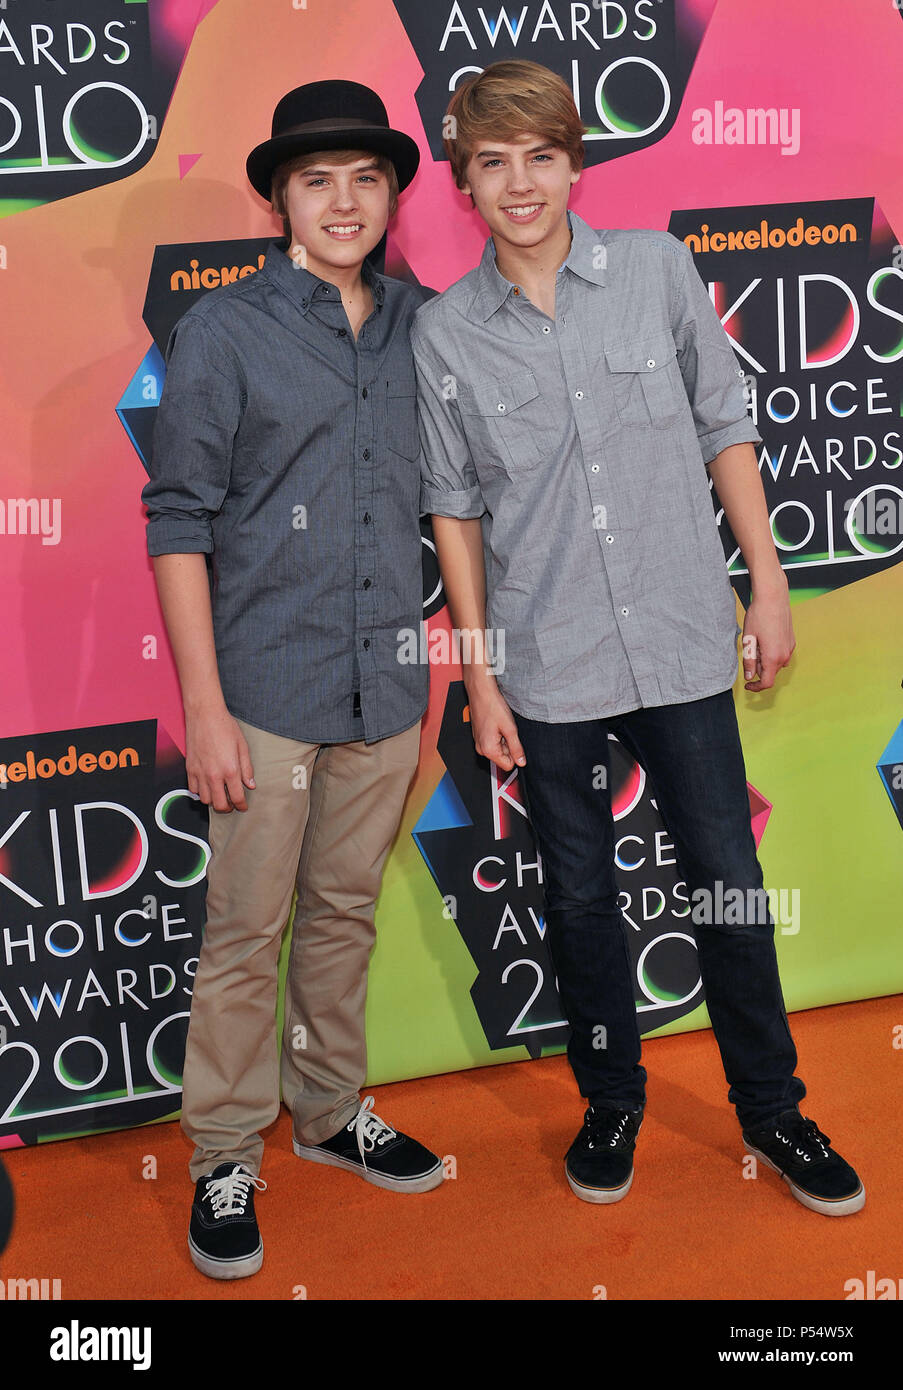 Cole Sprouse   Dylan Sprouse  68   - 23th  Annual Kids Choice Awards at The UCLA Pauley Pavillion In Los Angeles.Cole Sprouse   Dylan Sprouse  68  Event in Hollywood Life - California, Red Carpet Event, USA, Film Industry, Celebrities, Photography, Bestof, Arts Culture and Entertainment, Celebrities fashion, Best of, Hollywood Life, Event in Hollywood Life - California, Red Carpet and backstage, Music celebrities, Topix, Couple, family ( husband and wife ) and kids- Children, brothers and sisters inquiry tsuni@Gamma-USA.com, Credit Tsuni / USA, 2010 Stock Photo